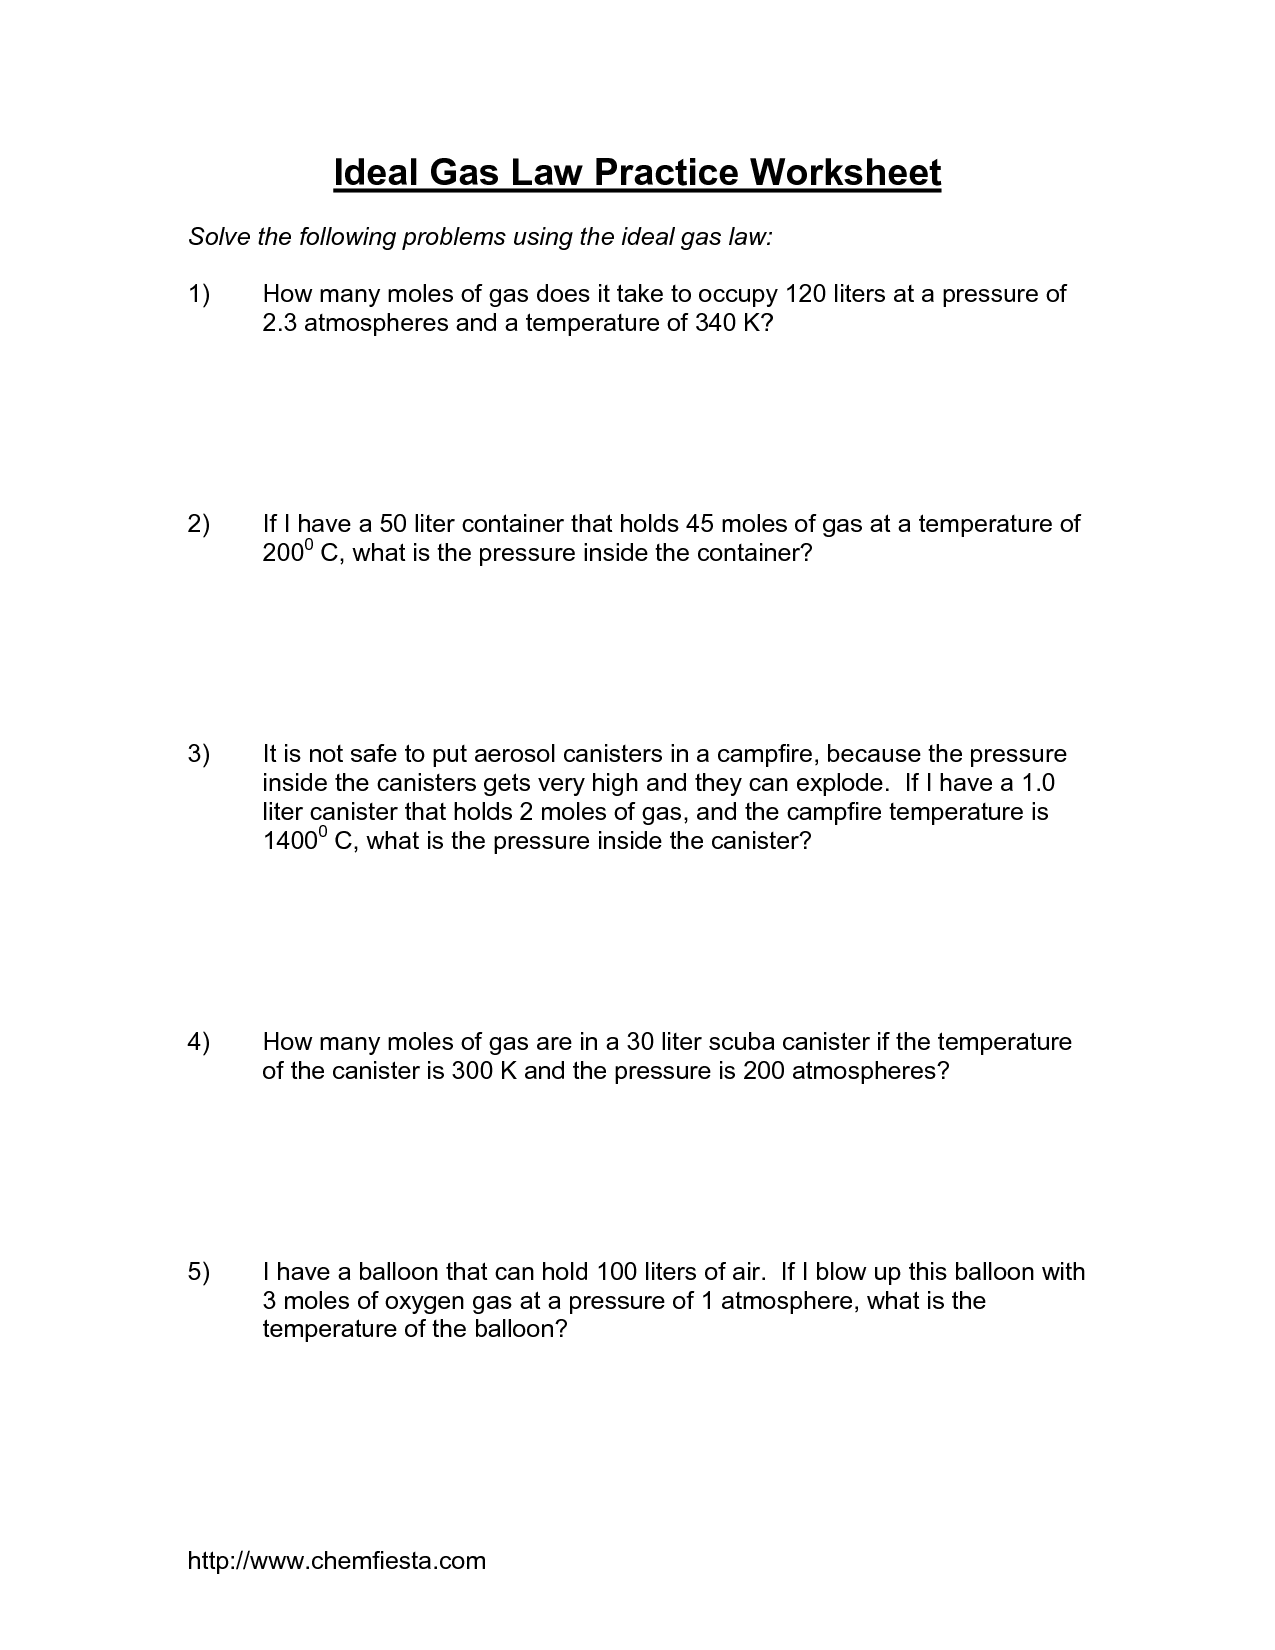 Ideal Gas Law Worksheet Answers Image